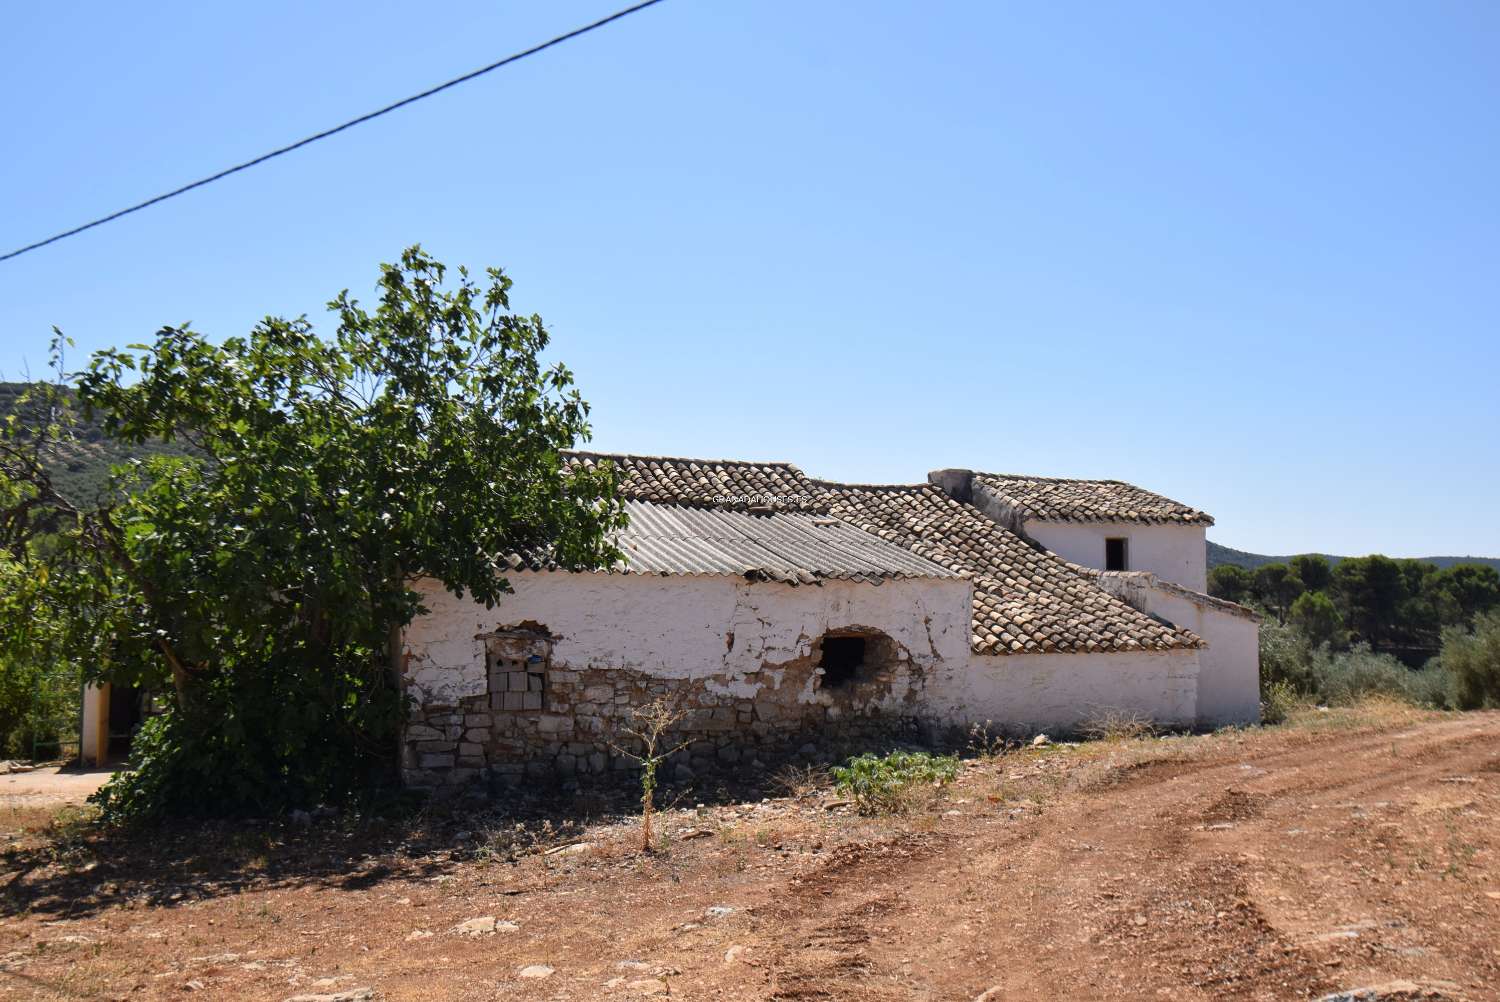 Andalusian farmhouse to reform